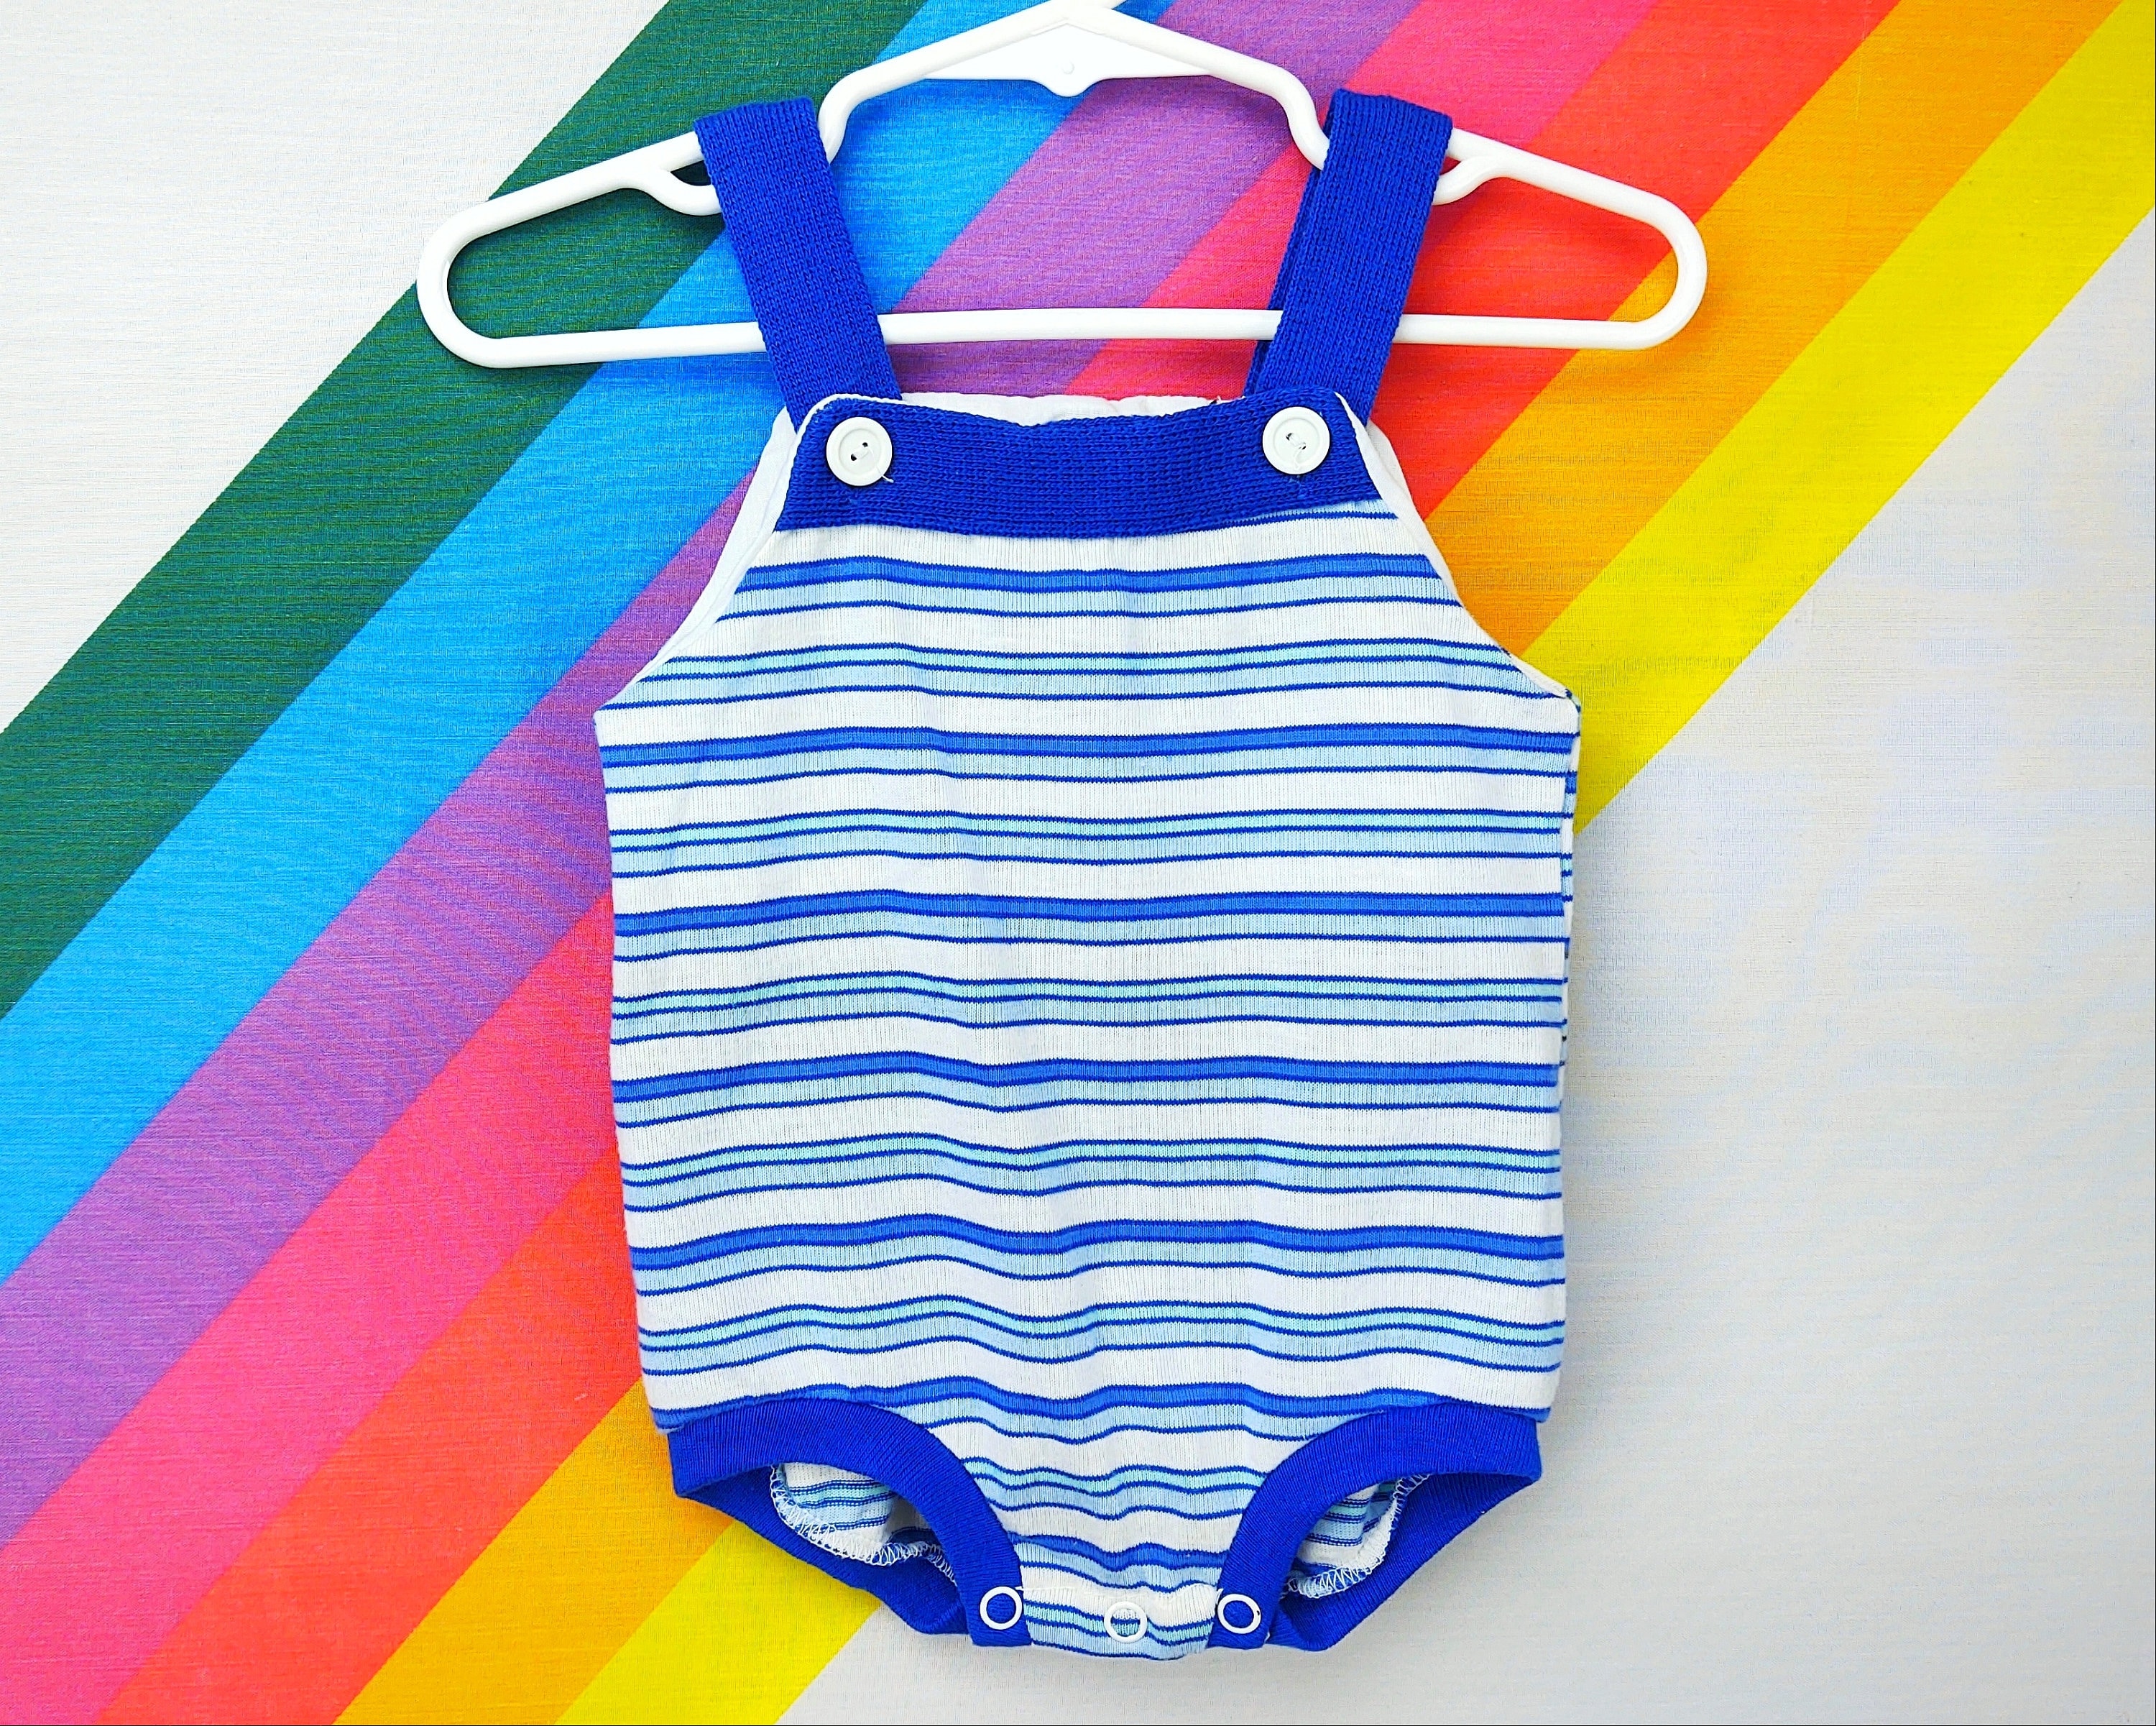 Vintage Baby Jumper  Knit Infant Onesie  Baby Overalls  Baby Outfit  Striped Stripes  0M 3M 3 Months Newborn Infant